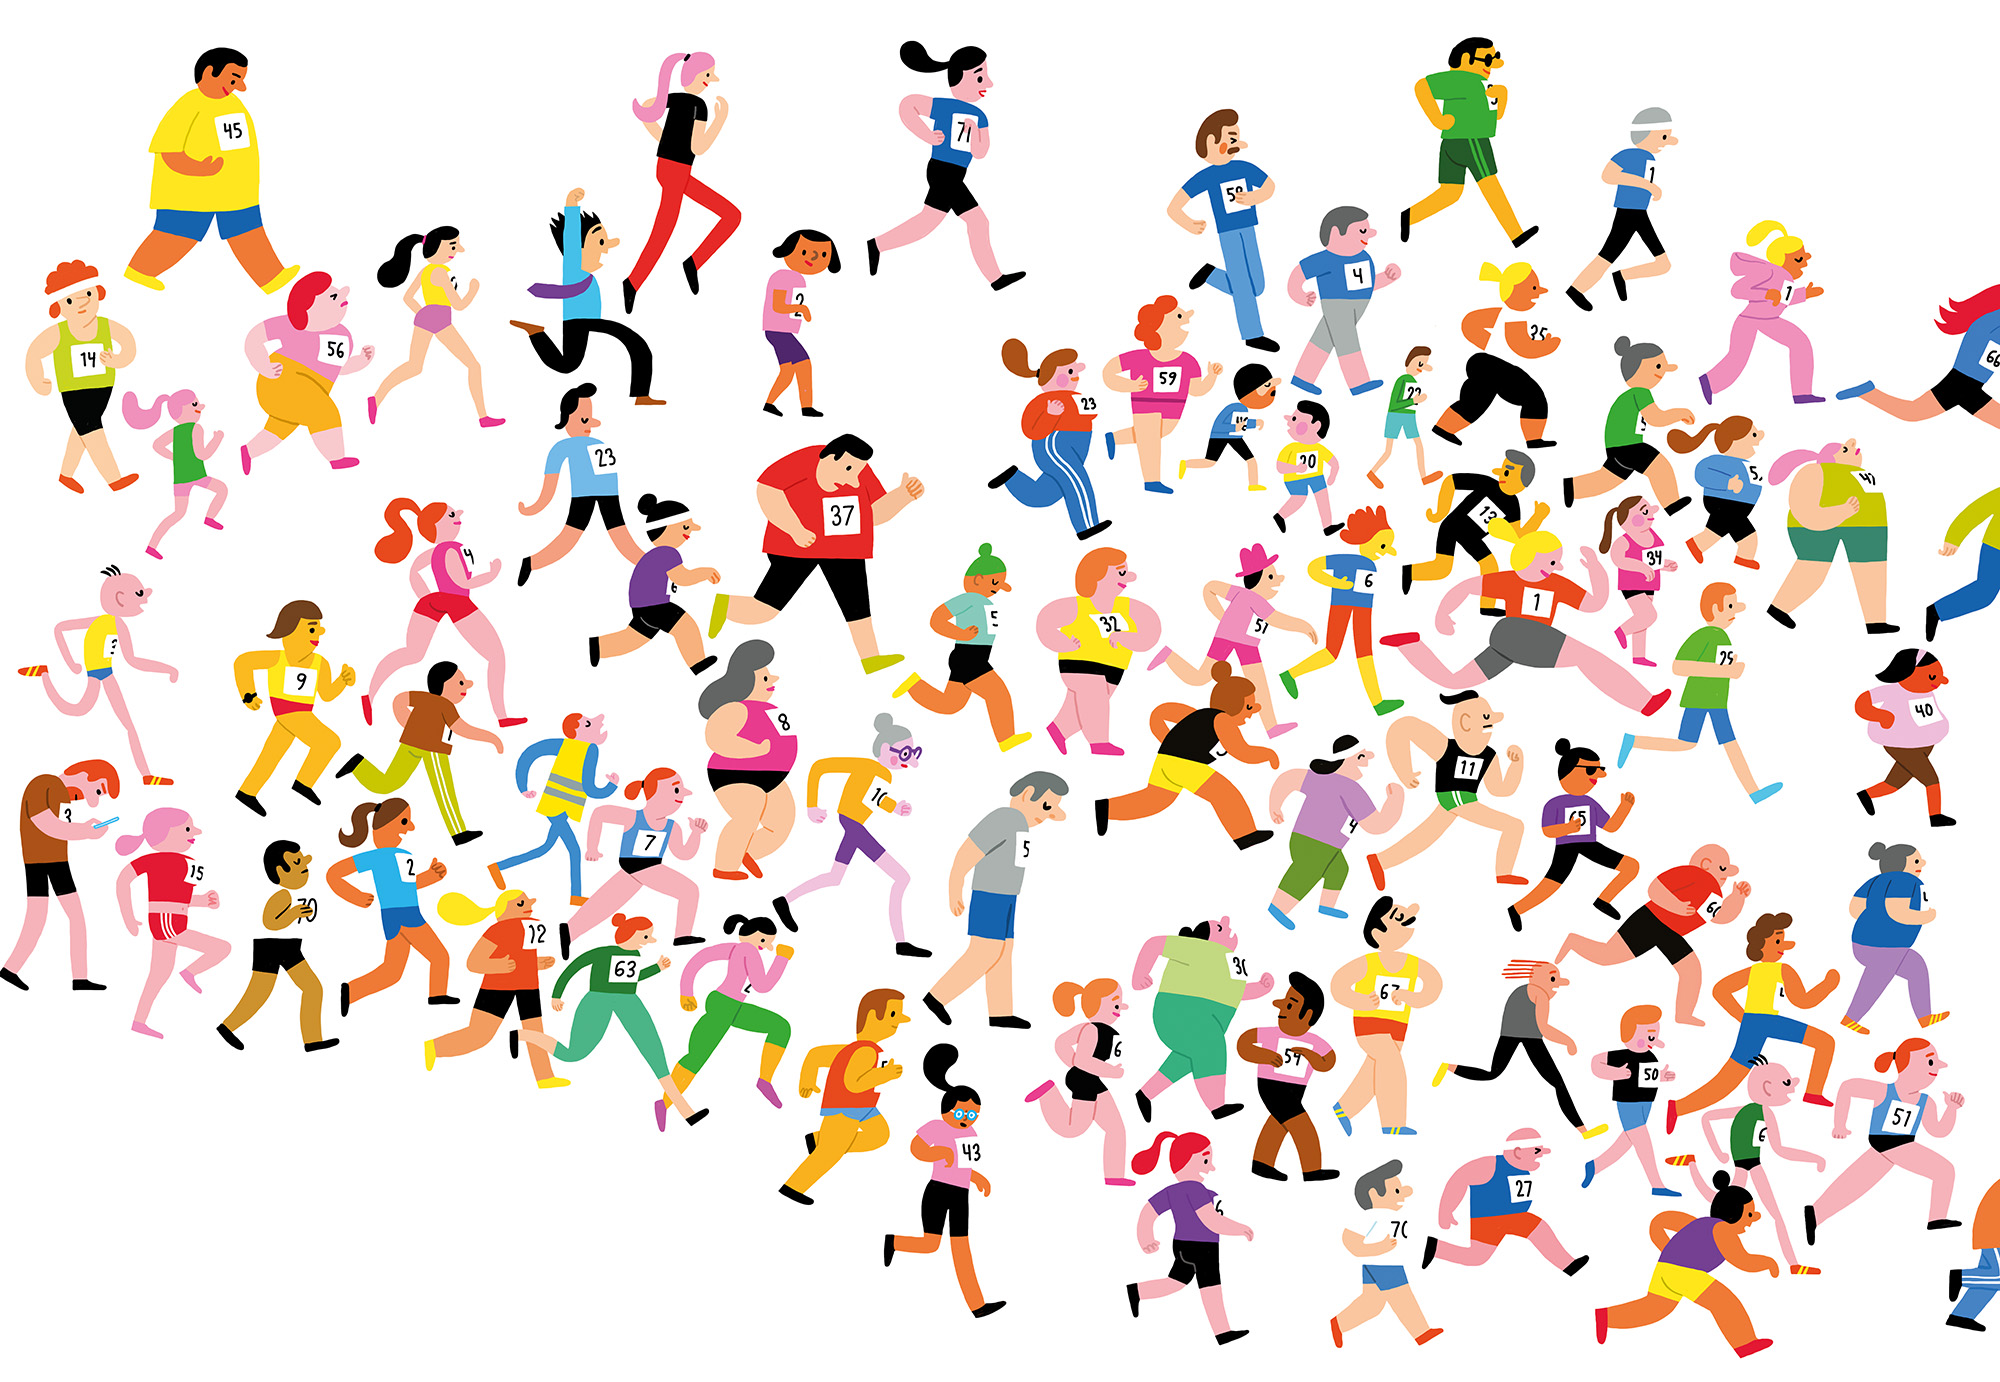 Illustration of many people running a race